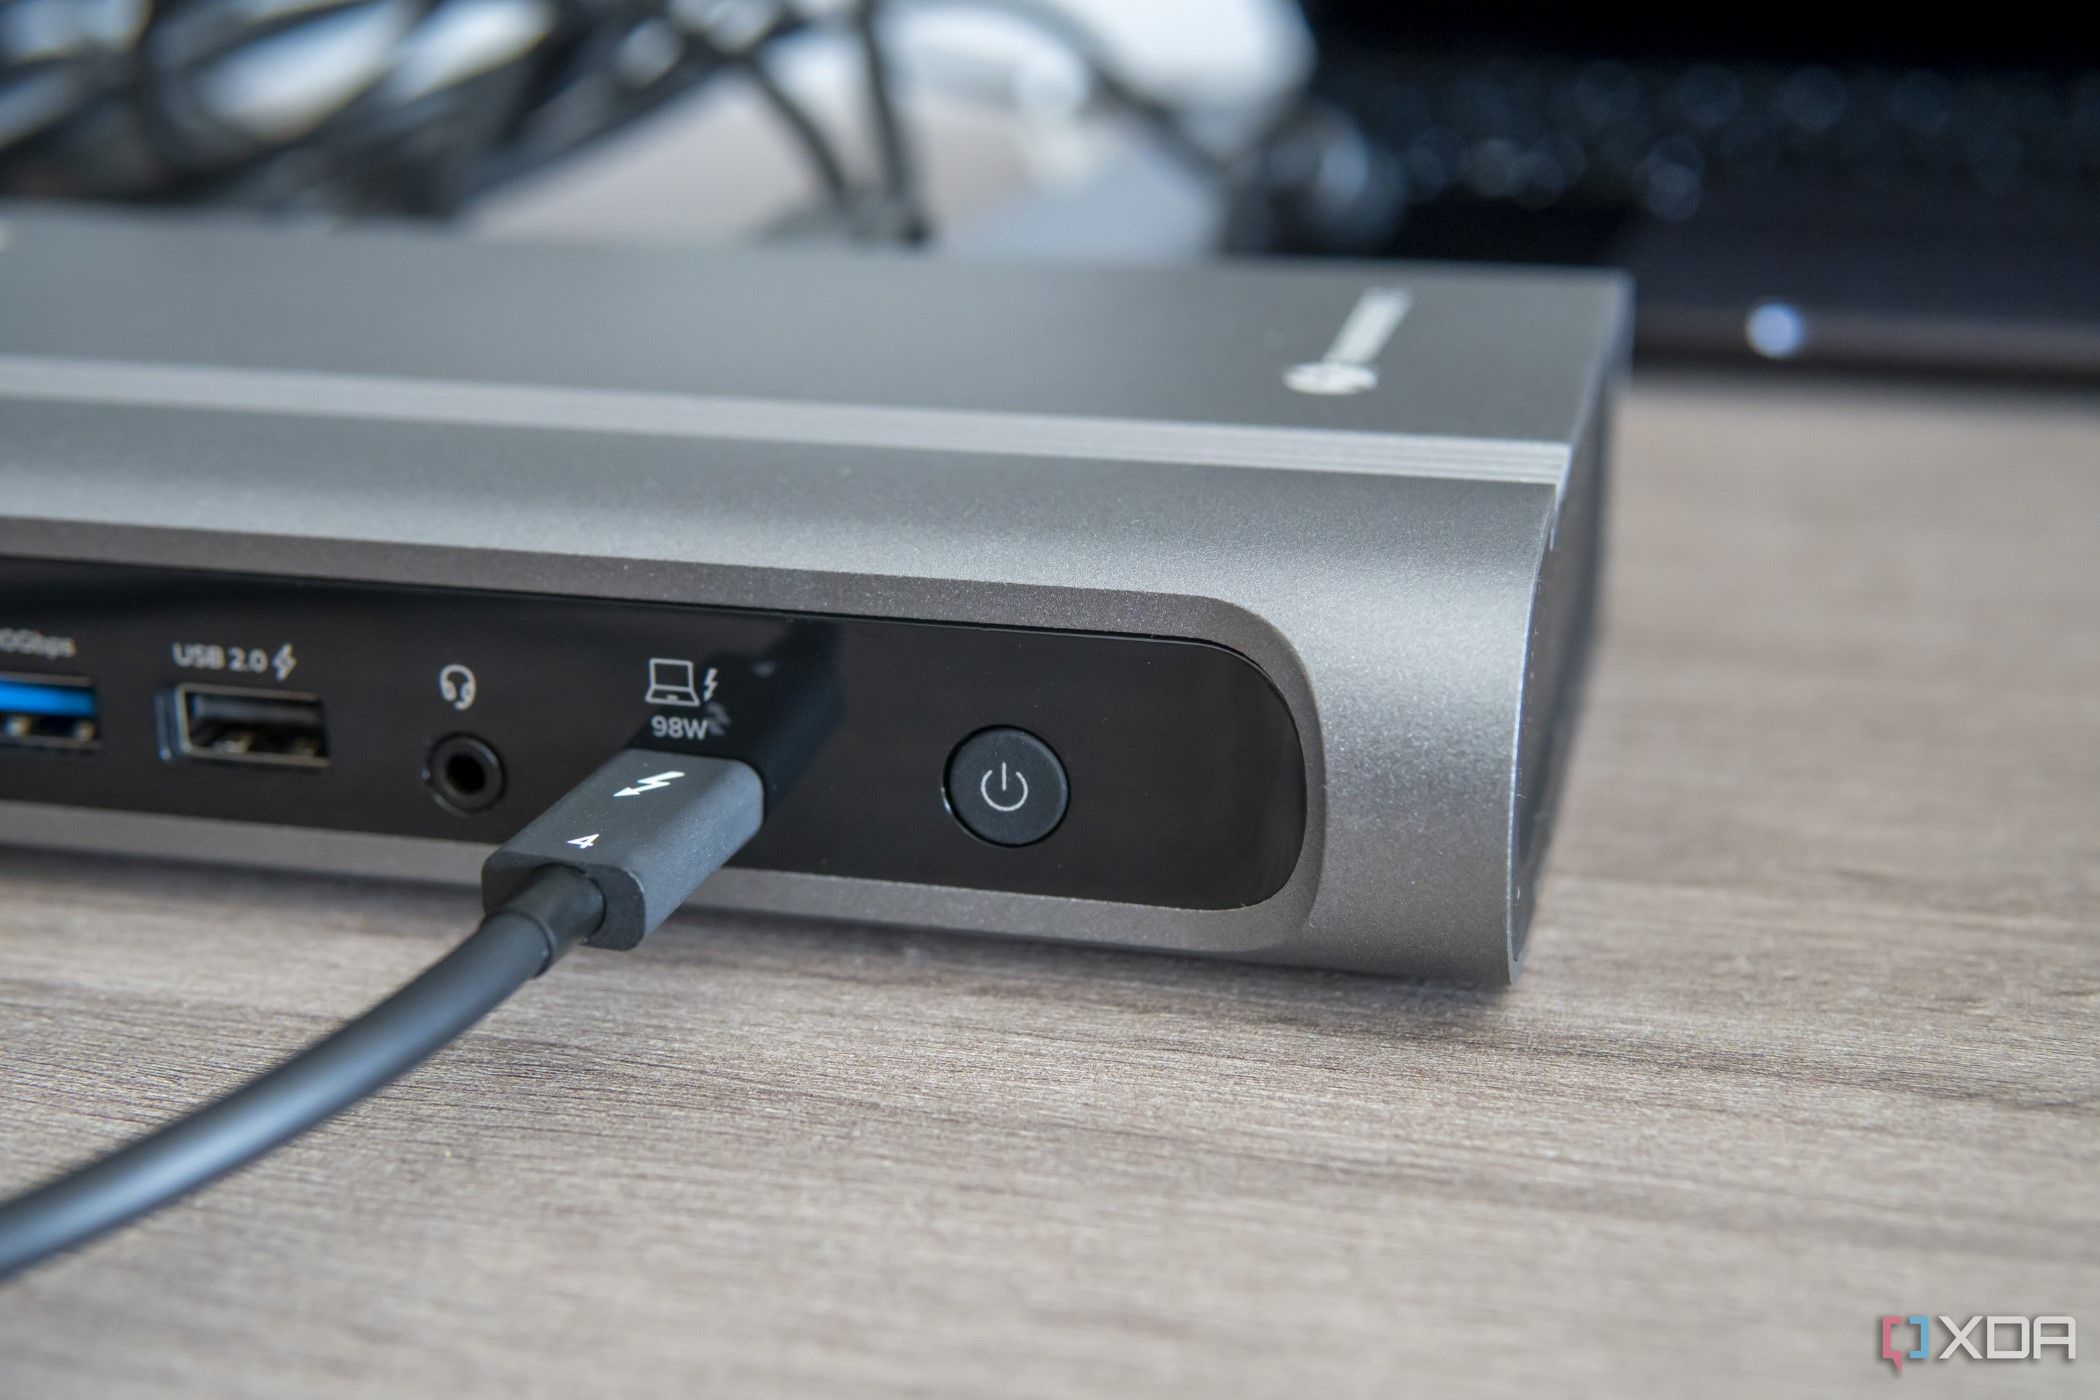 Close-up view of the power button on the Plugable 16-in-1 Thunderbolt 4 Dock 